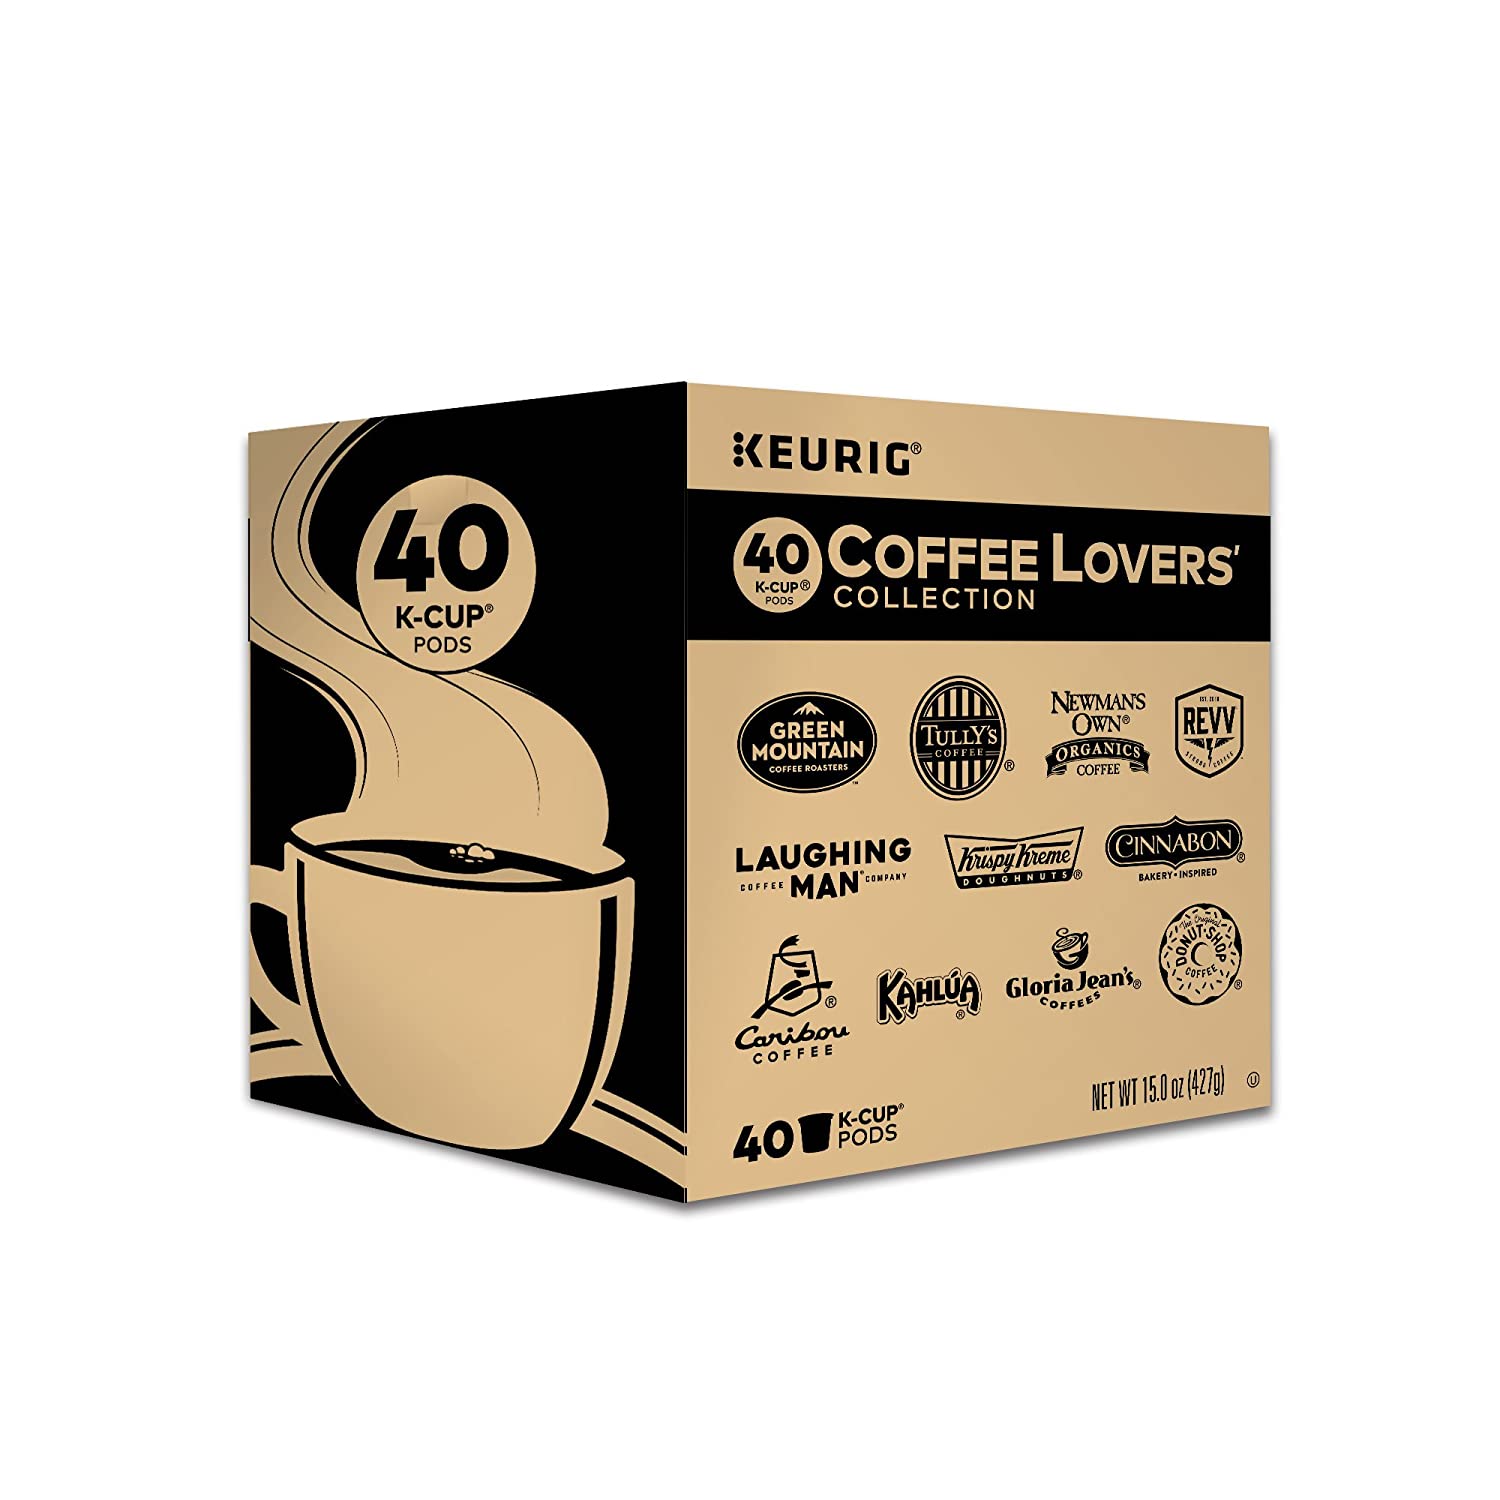 K-Classic Coffee Maker Rhubarb and Coffee Lovers Collection 40 Count Sampler Pack 